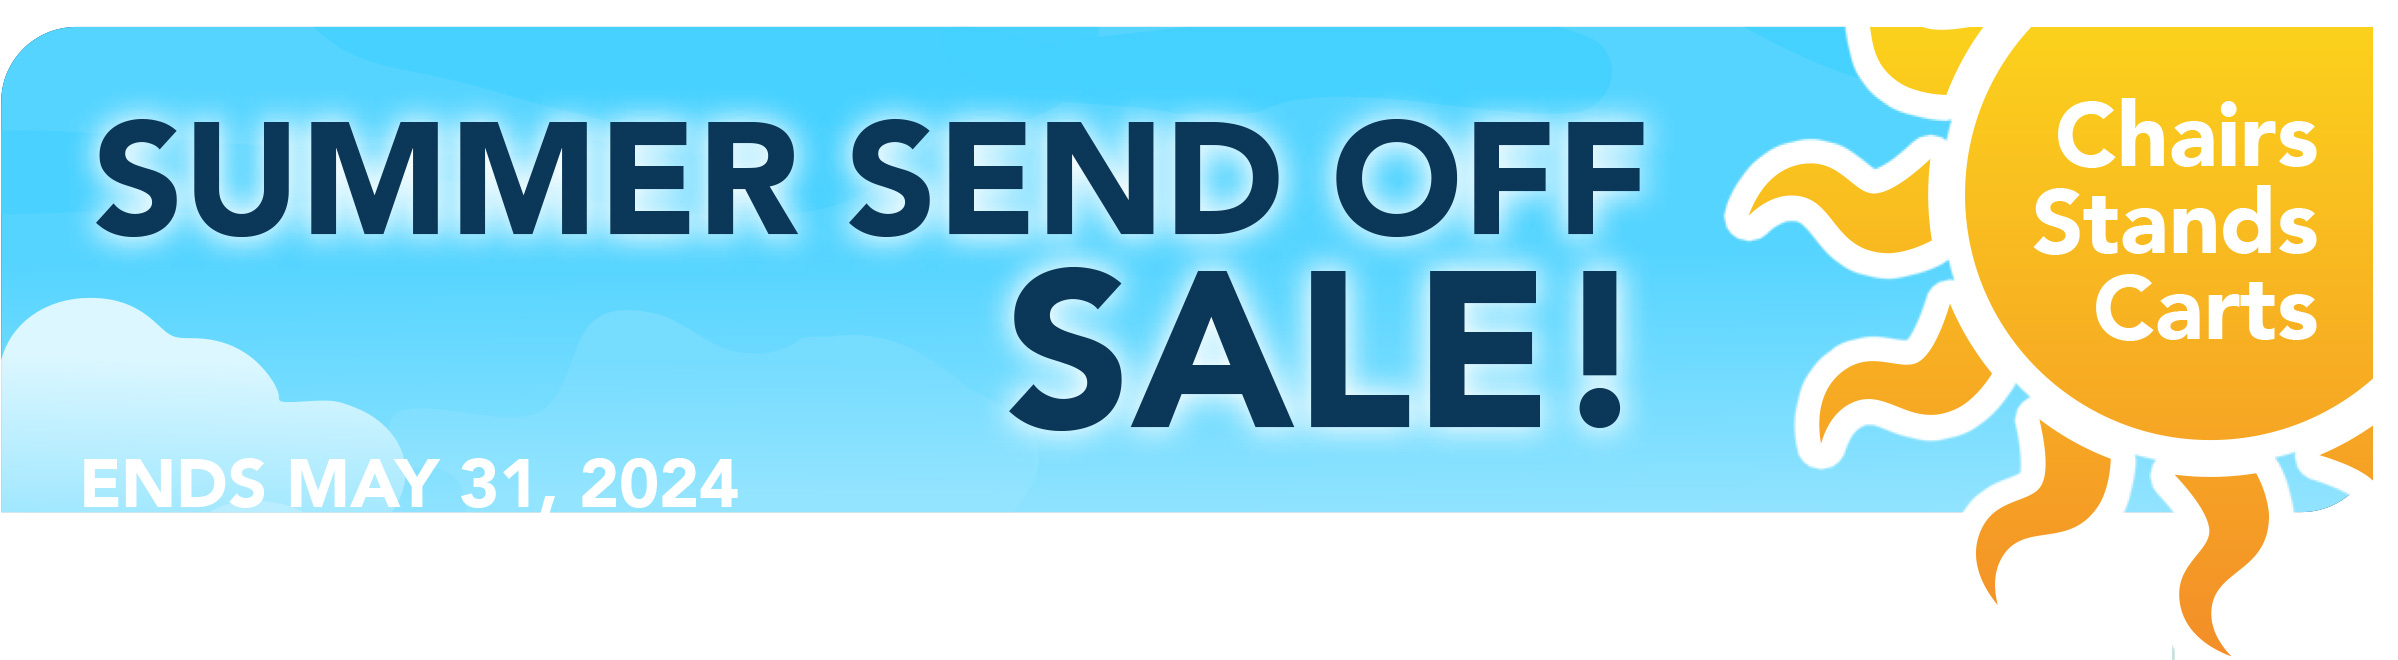 SUMMER SEND OFF SALE! ENDS MAY 31, 2024